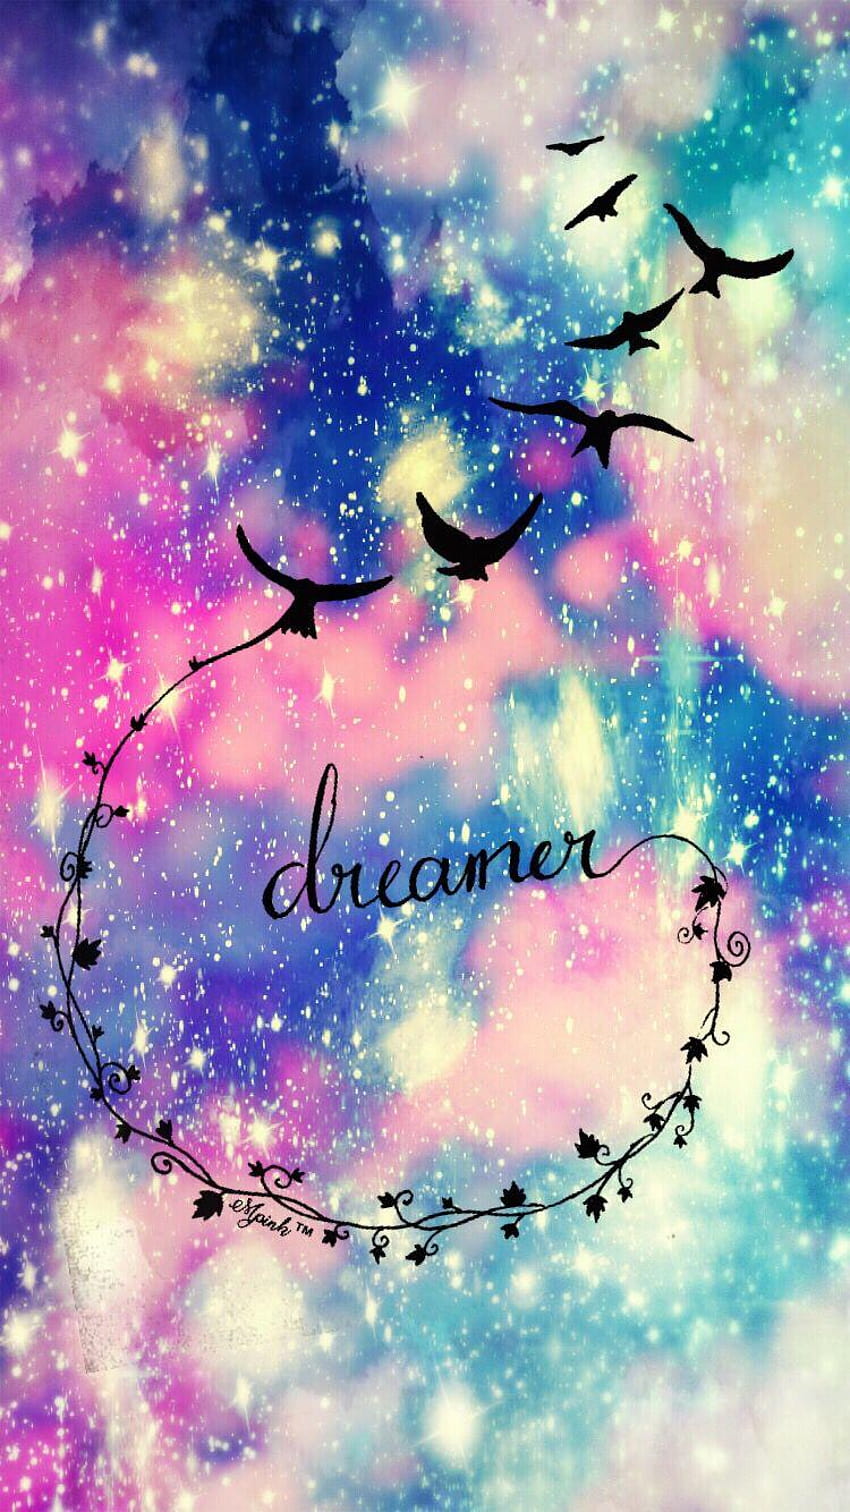 Dreamer Galaxy iPhone/Android I created for the app Top HD phone wallpaper